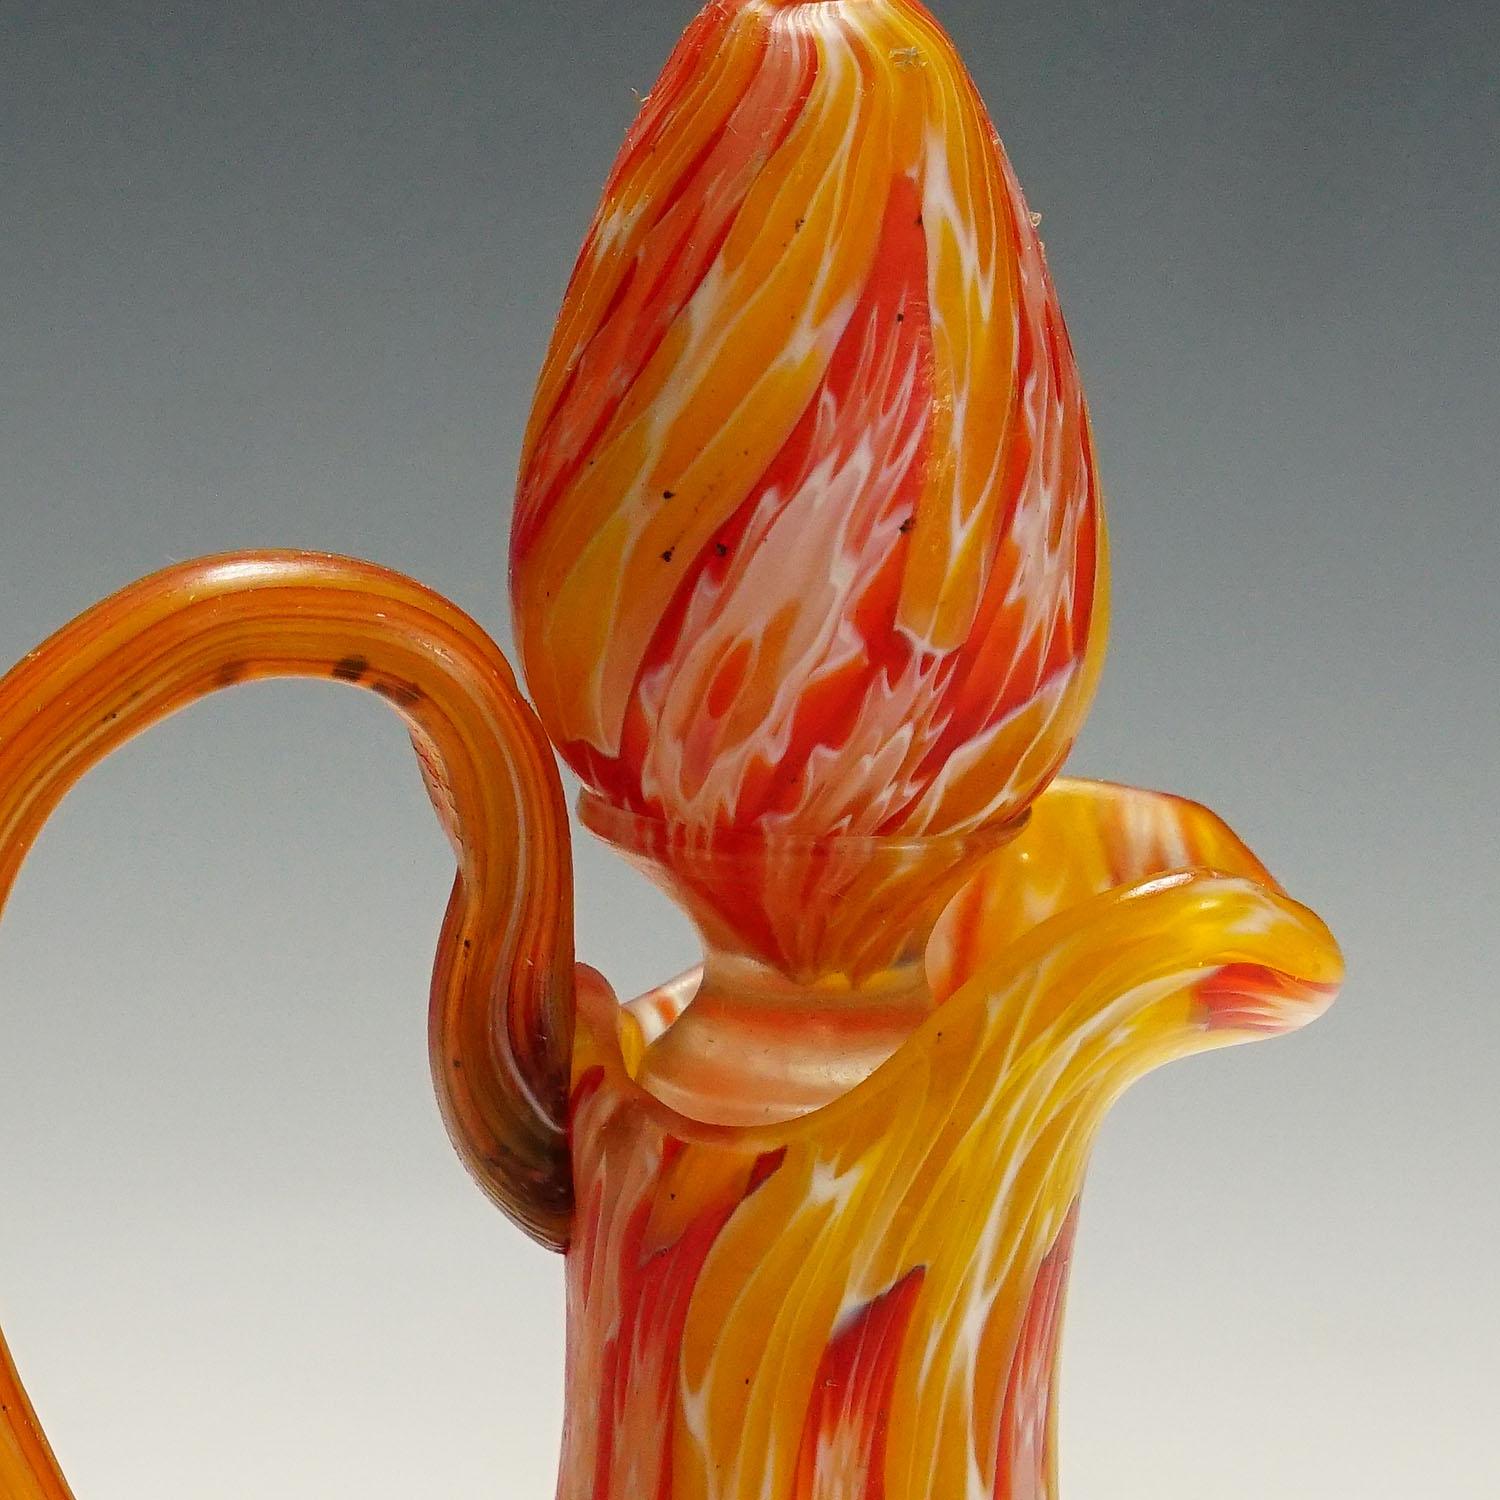 20th Century Antique Millefiori Jug with Handles by Fratelli Toso, Murano, circa 1920 For Sale